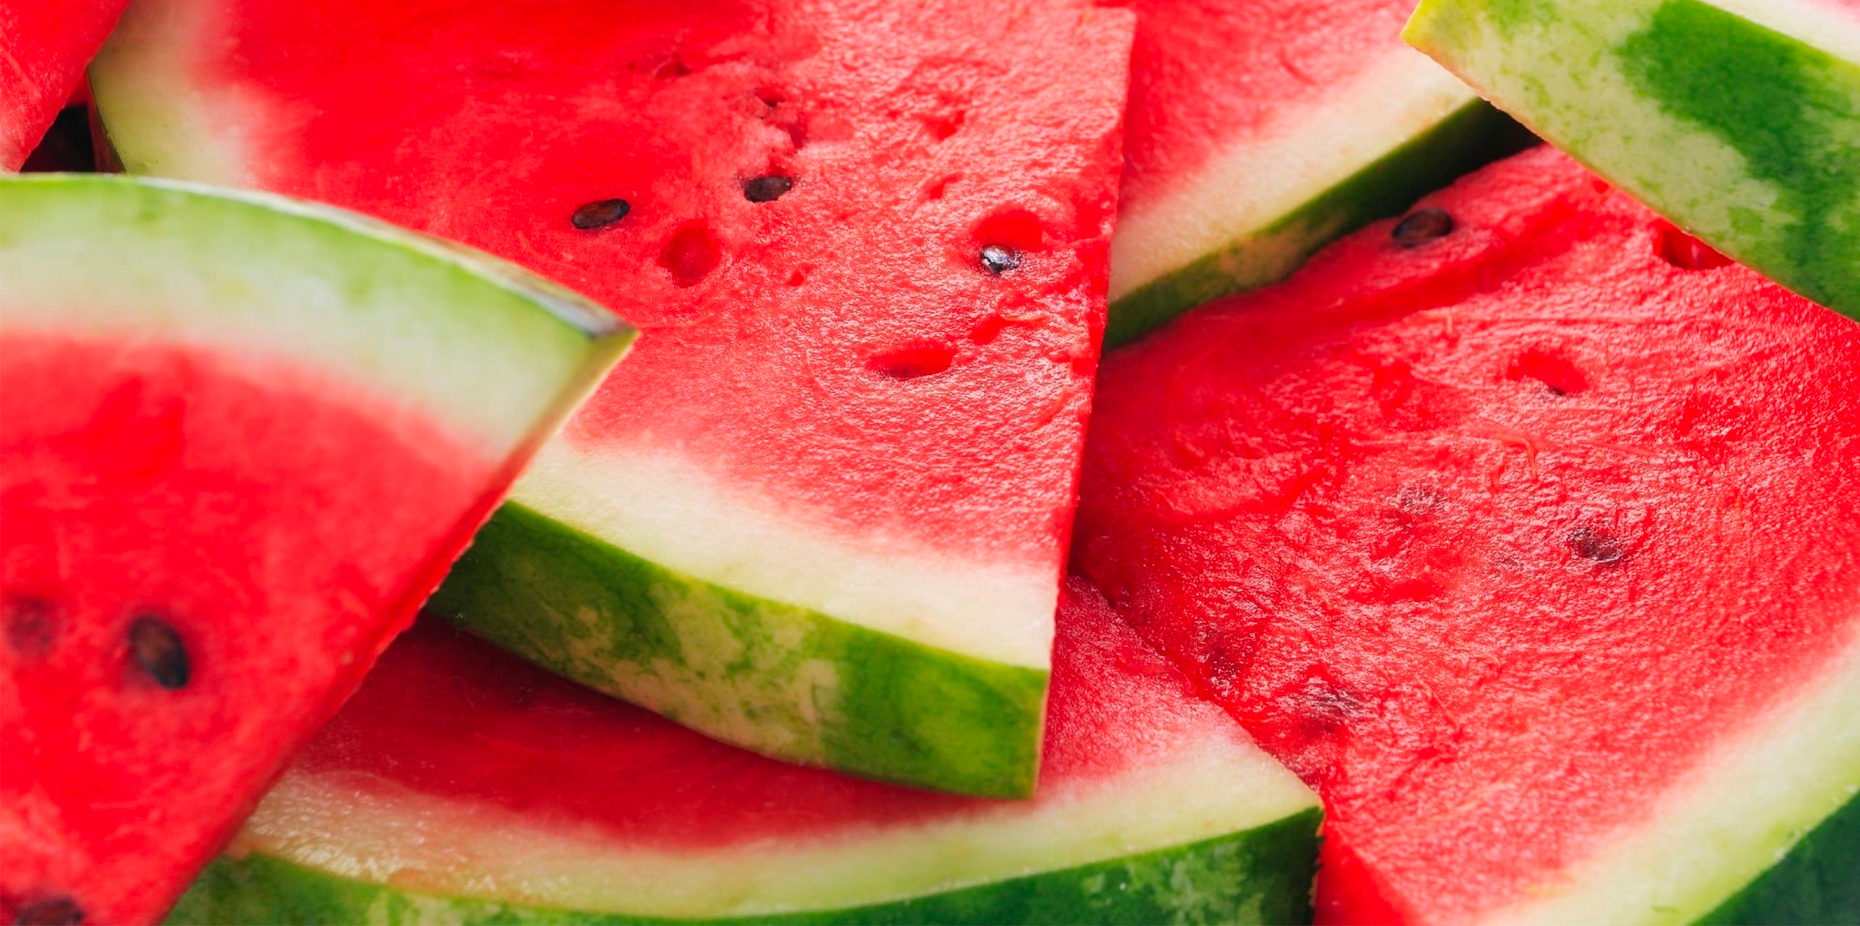 Watermelon: Facts, Nutrition, Benefits, & More